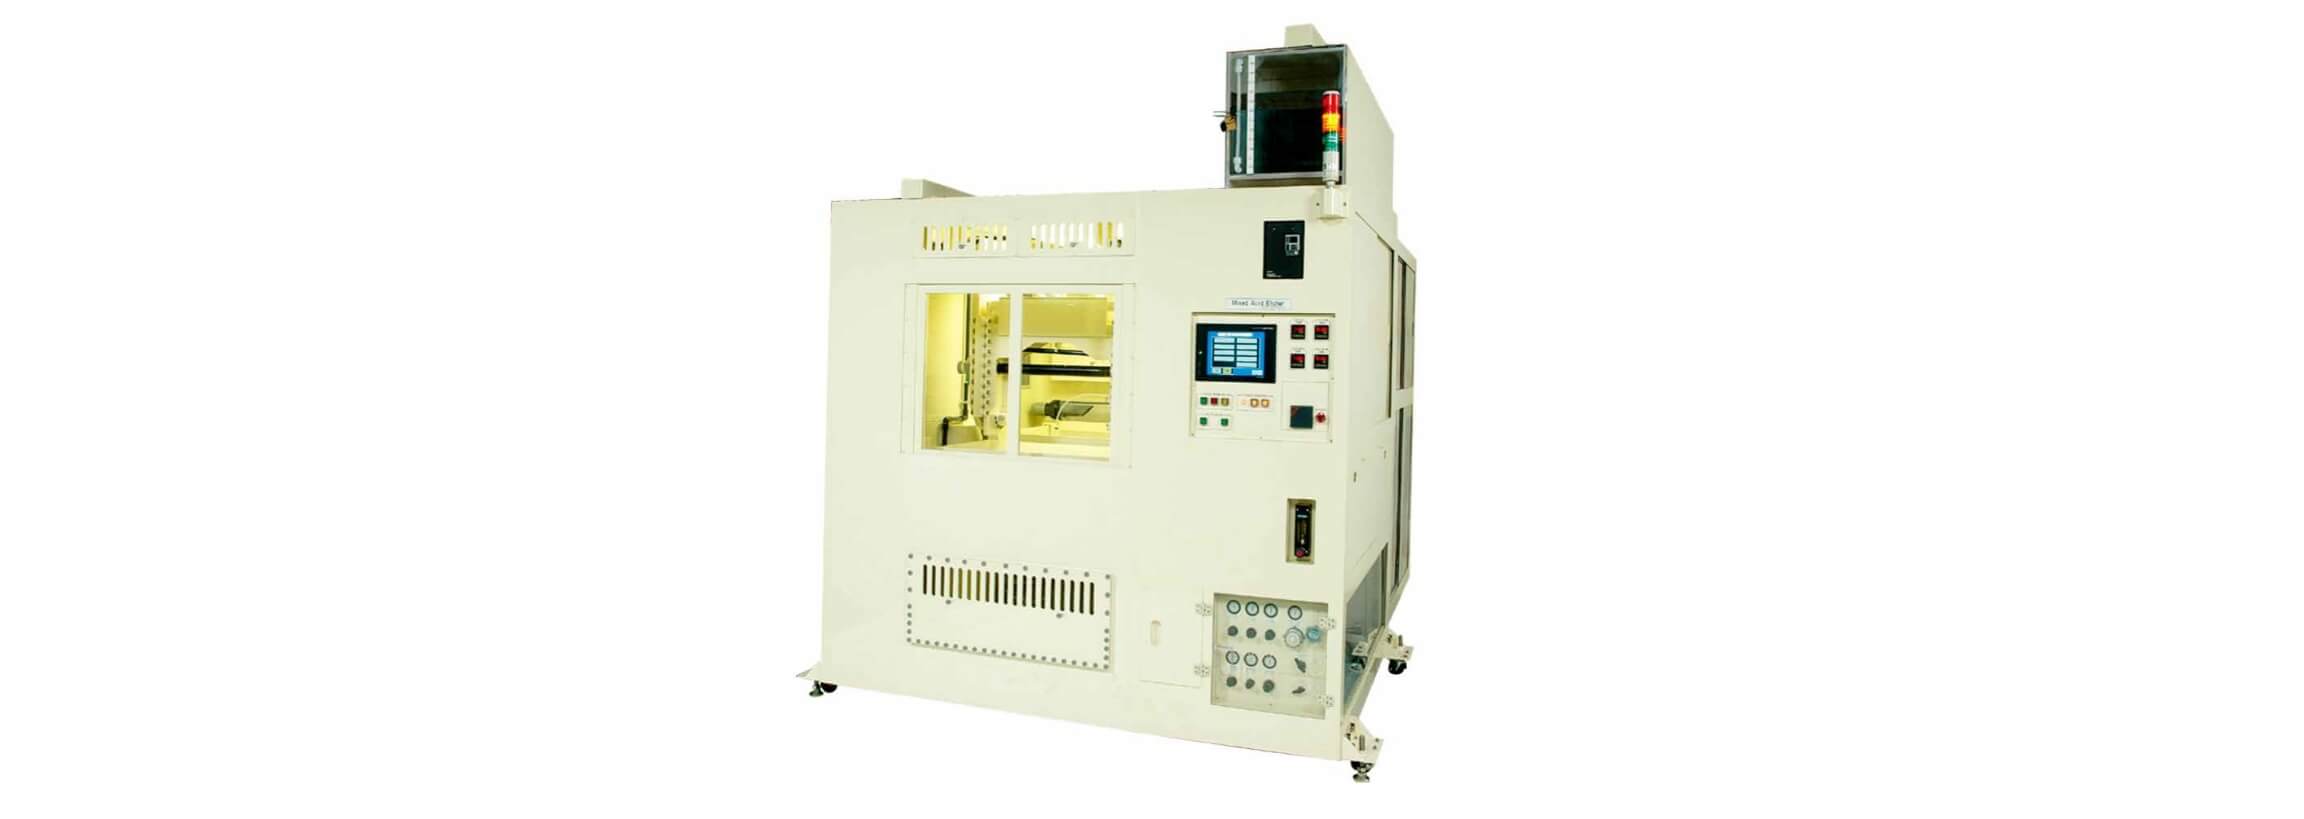 Rapid Wafer Etching Device